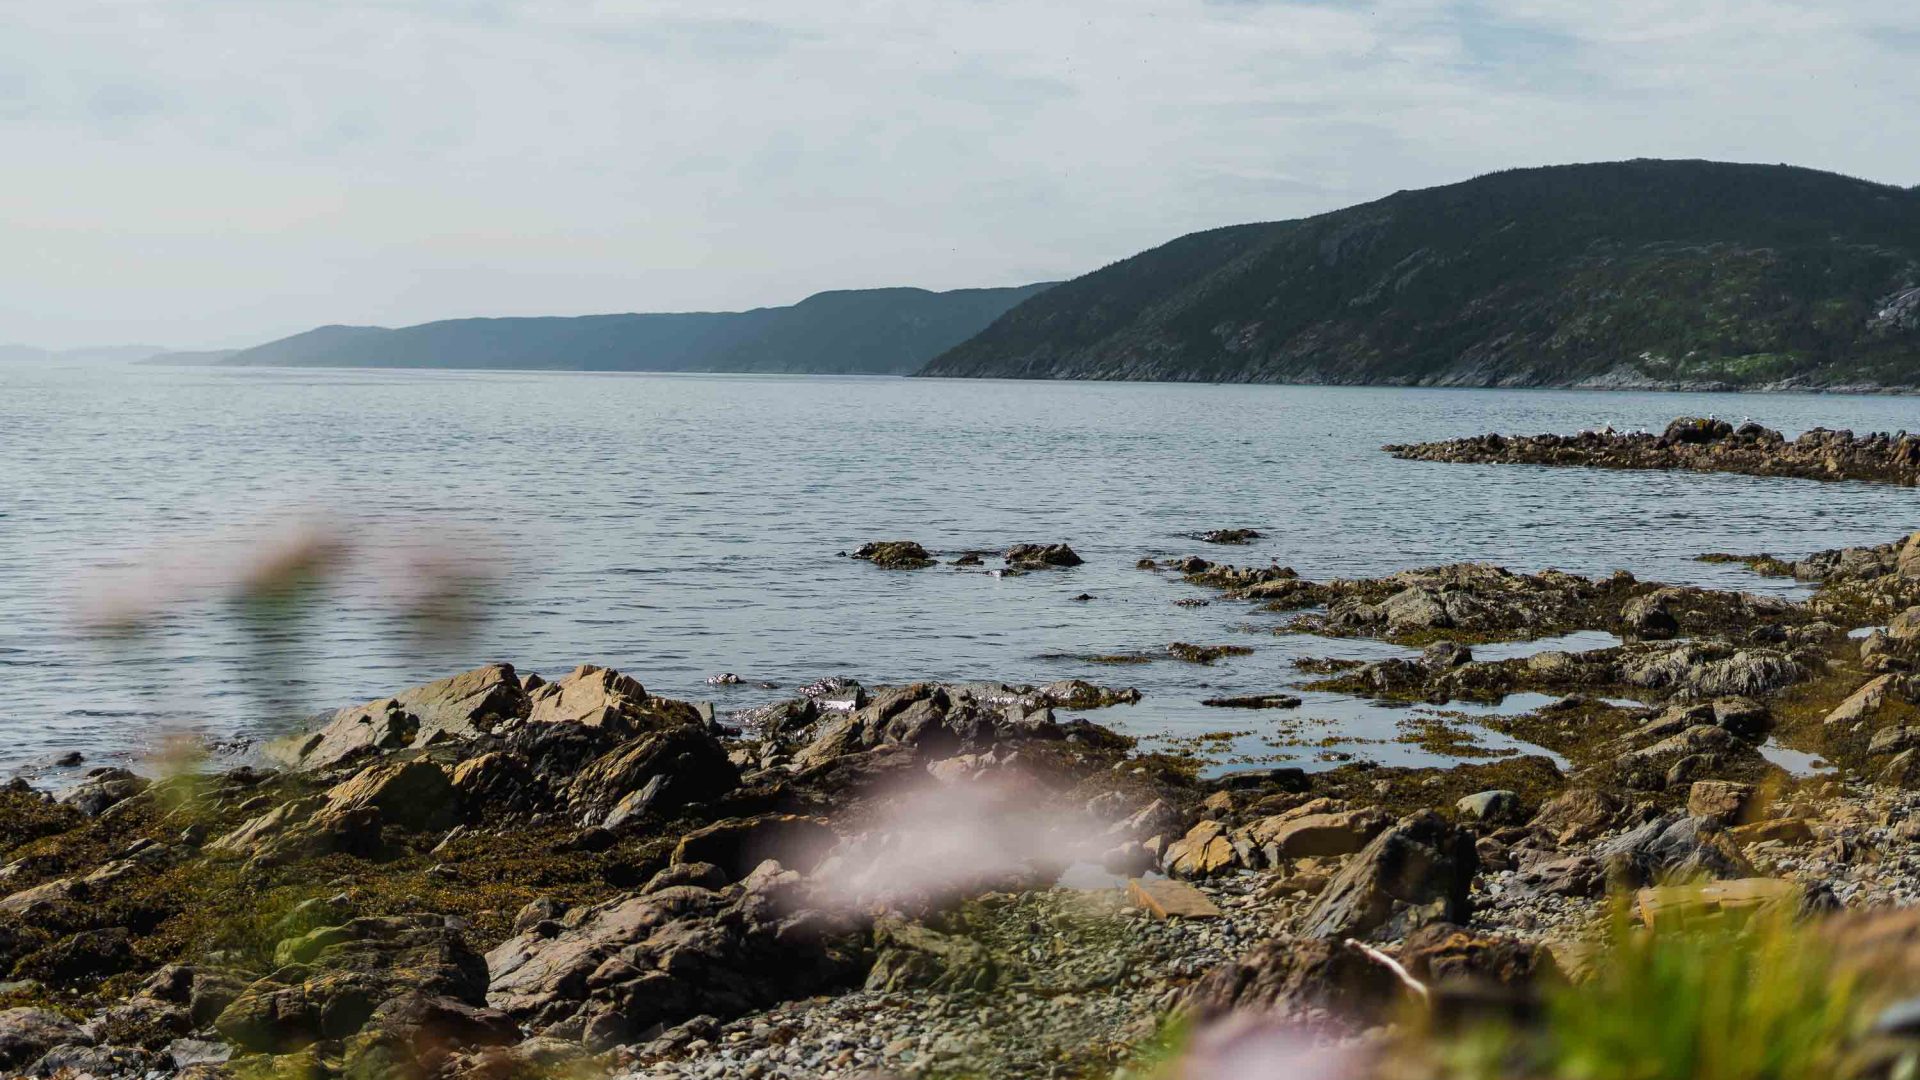 Ghost town no more: How tourism revived a once-decimated Newfoundland fishing community